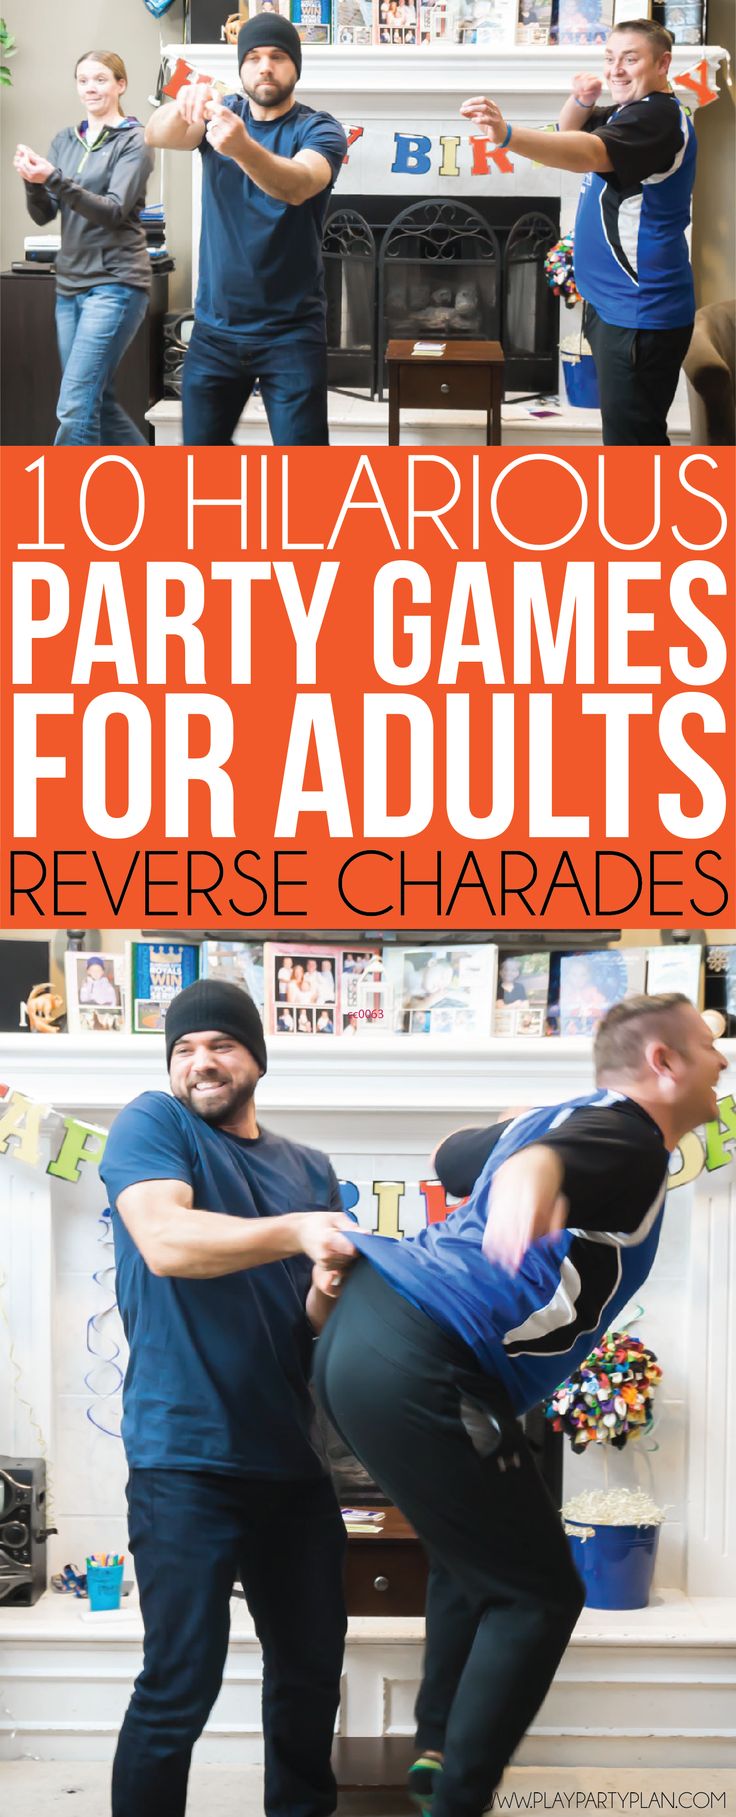 Hilarious Party Games For Adults Birthday Games For Adults Outdoor